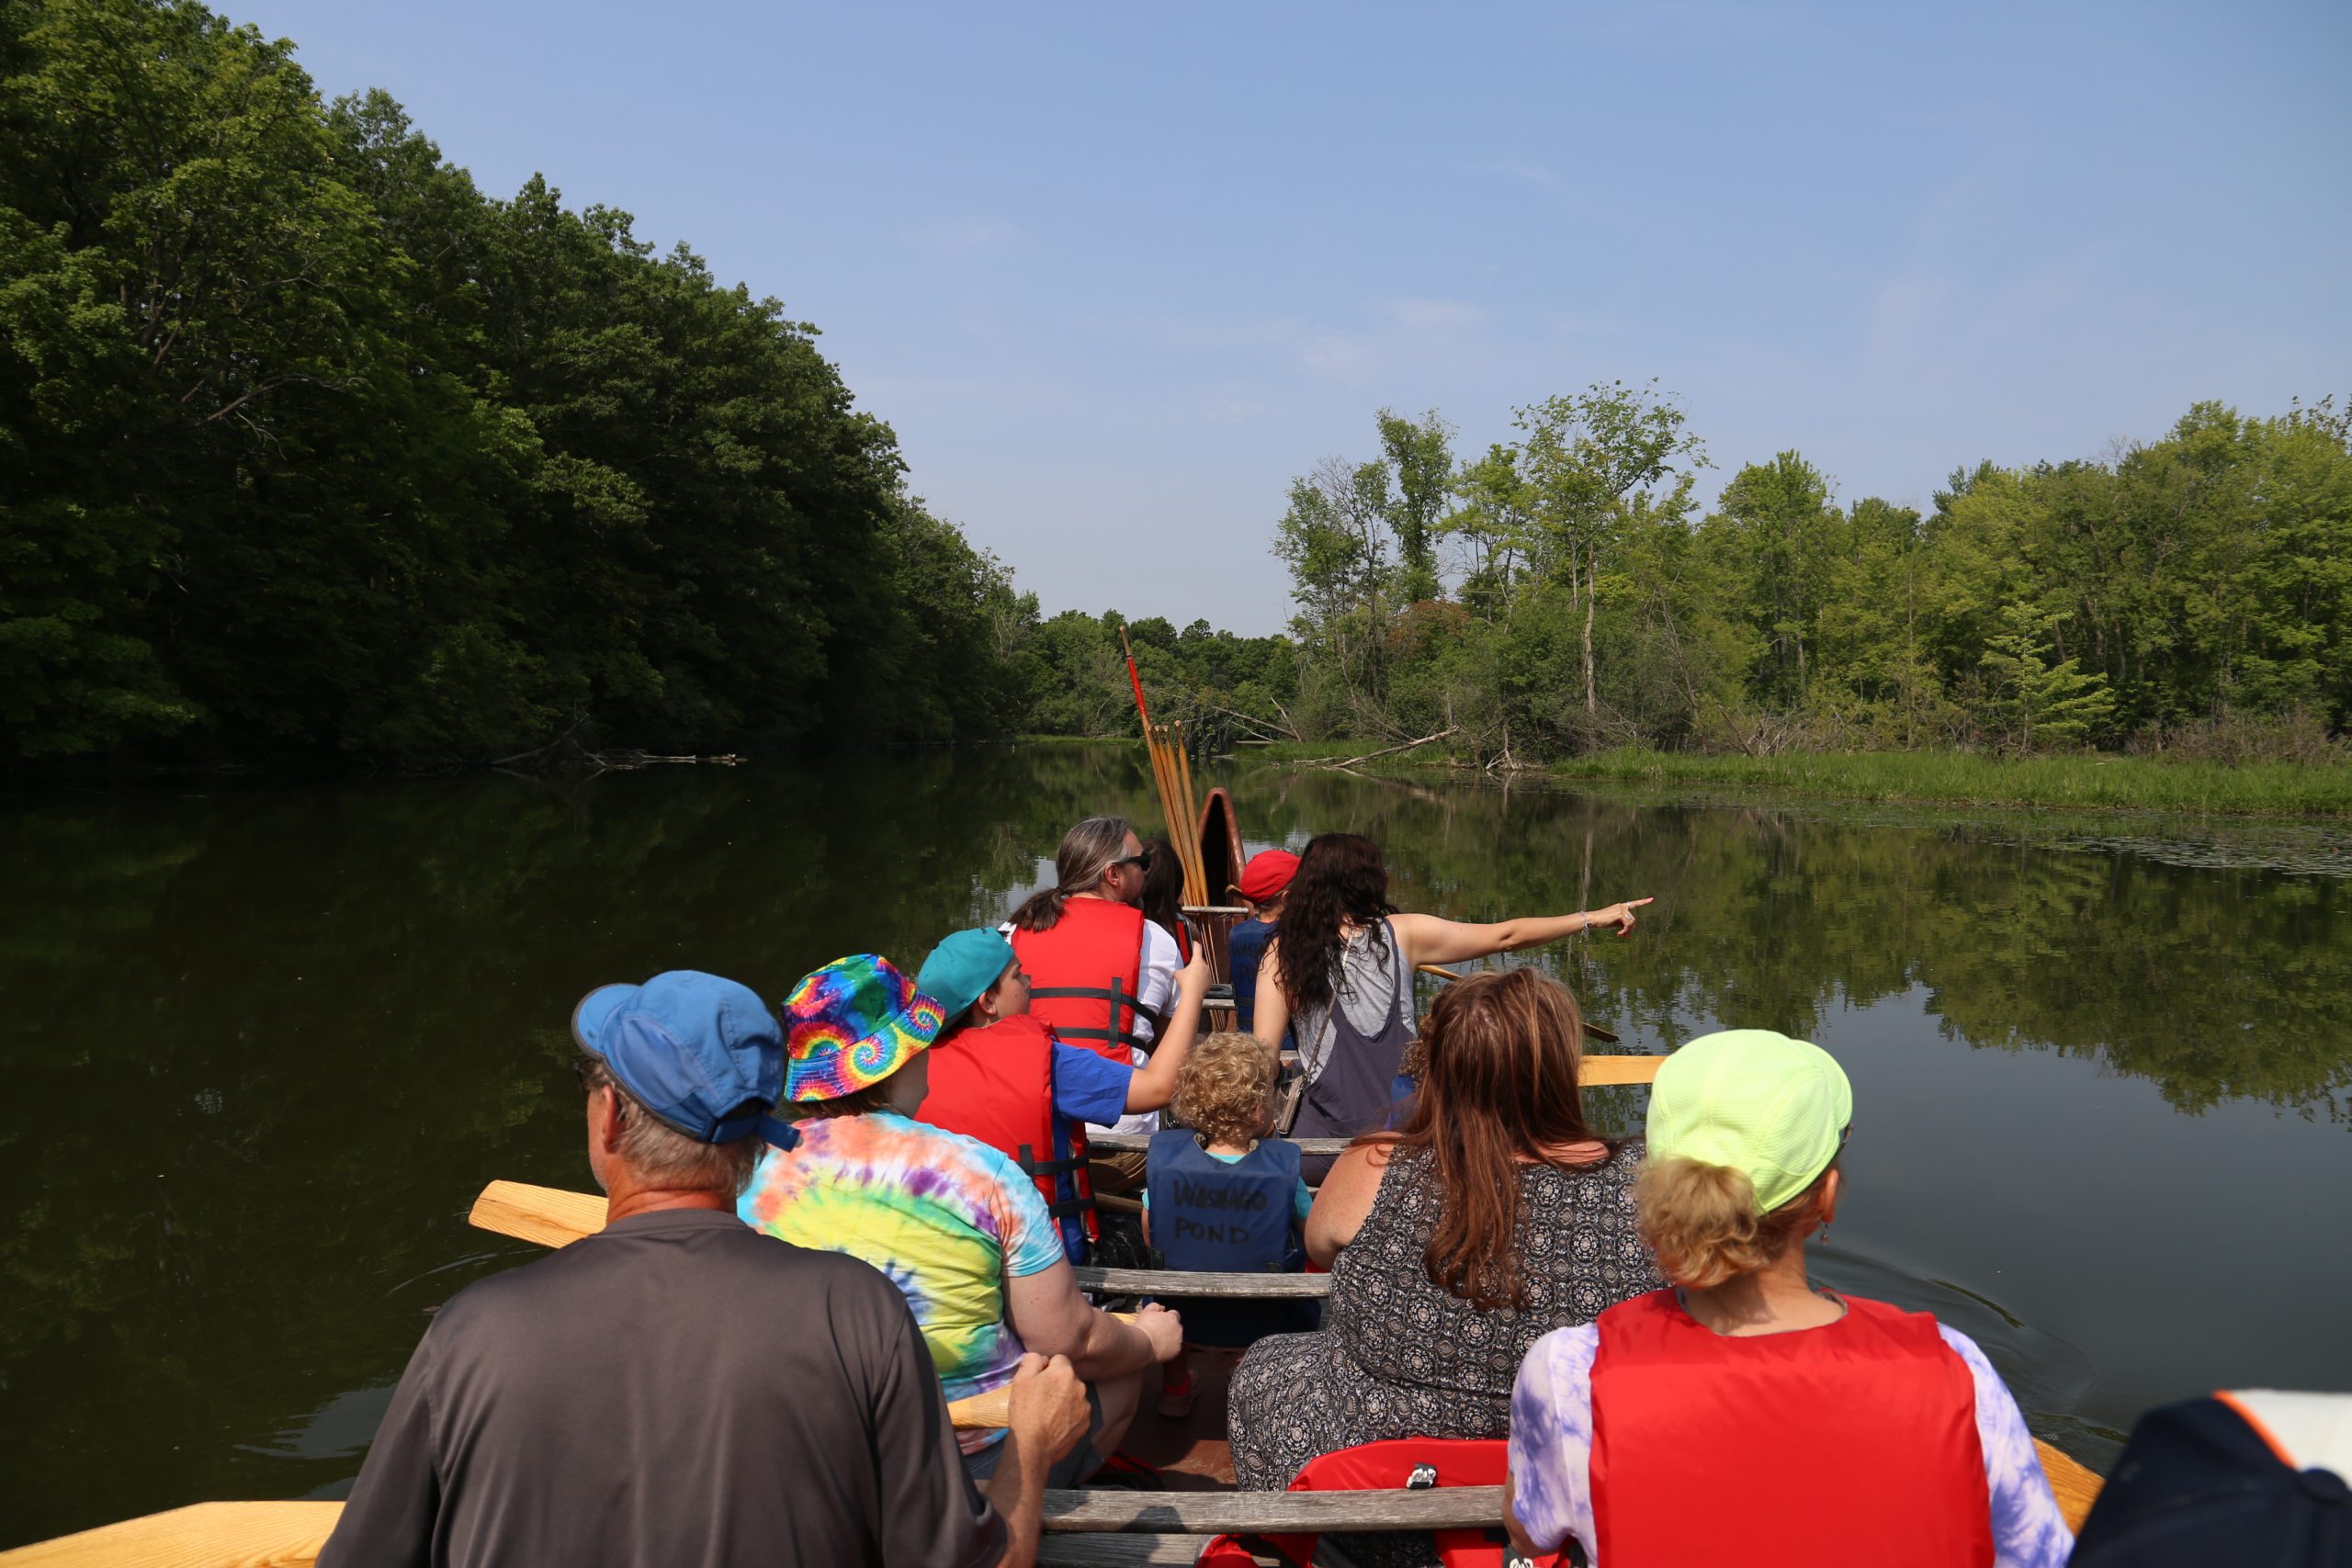 men, women, and a child on canoe in the Huron-Clinton Metroparks